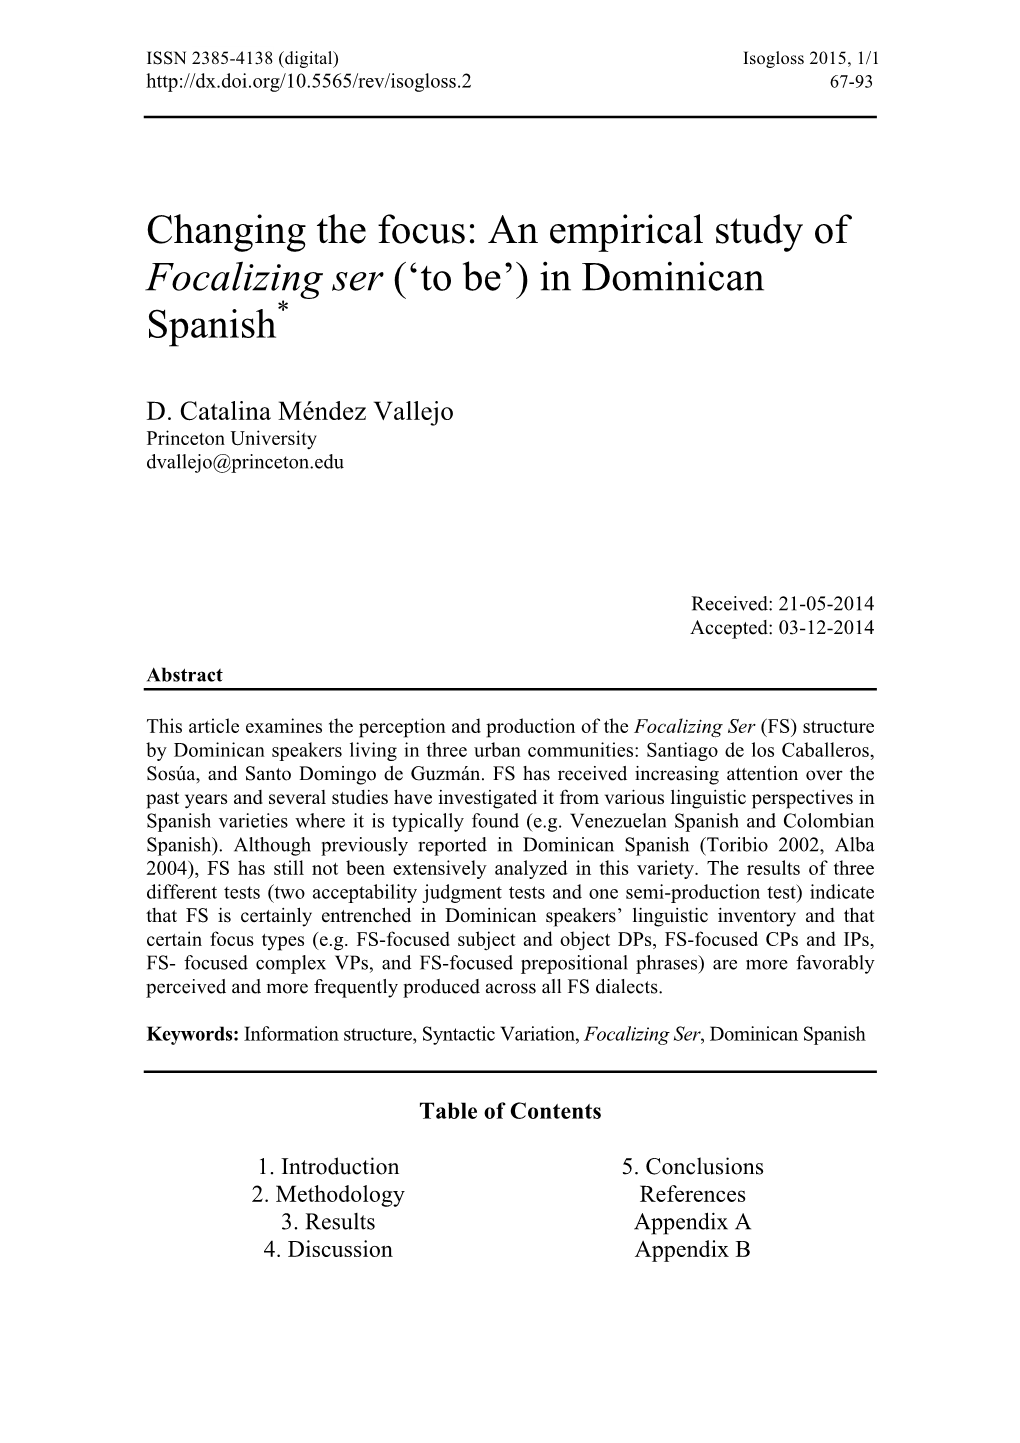 An Empirical Study of Focalizing Ser ('To Be') in Dominican Spanish